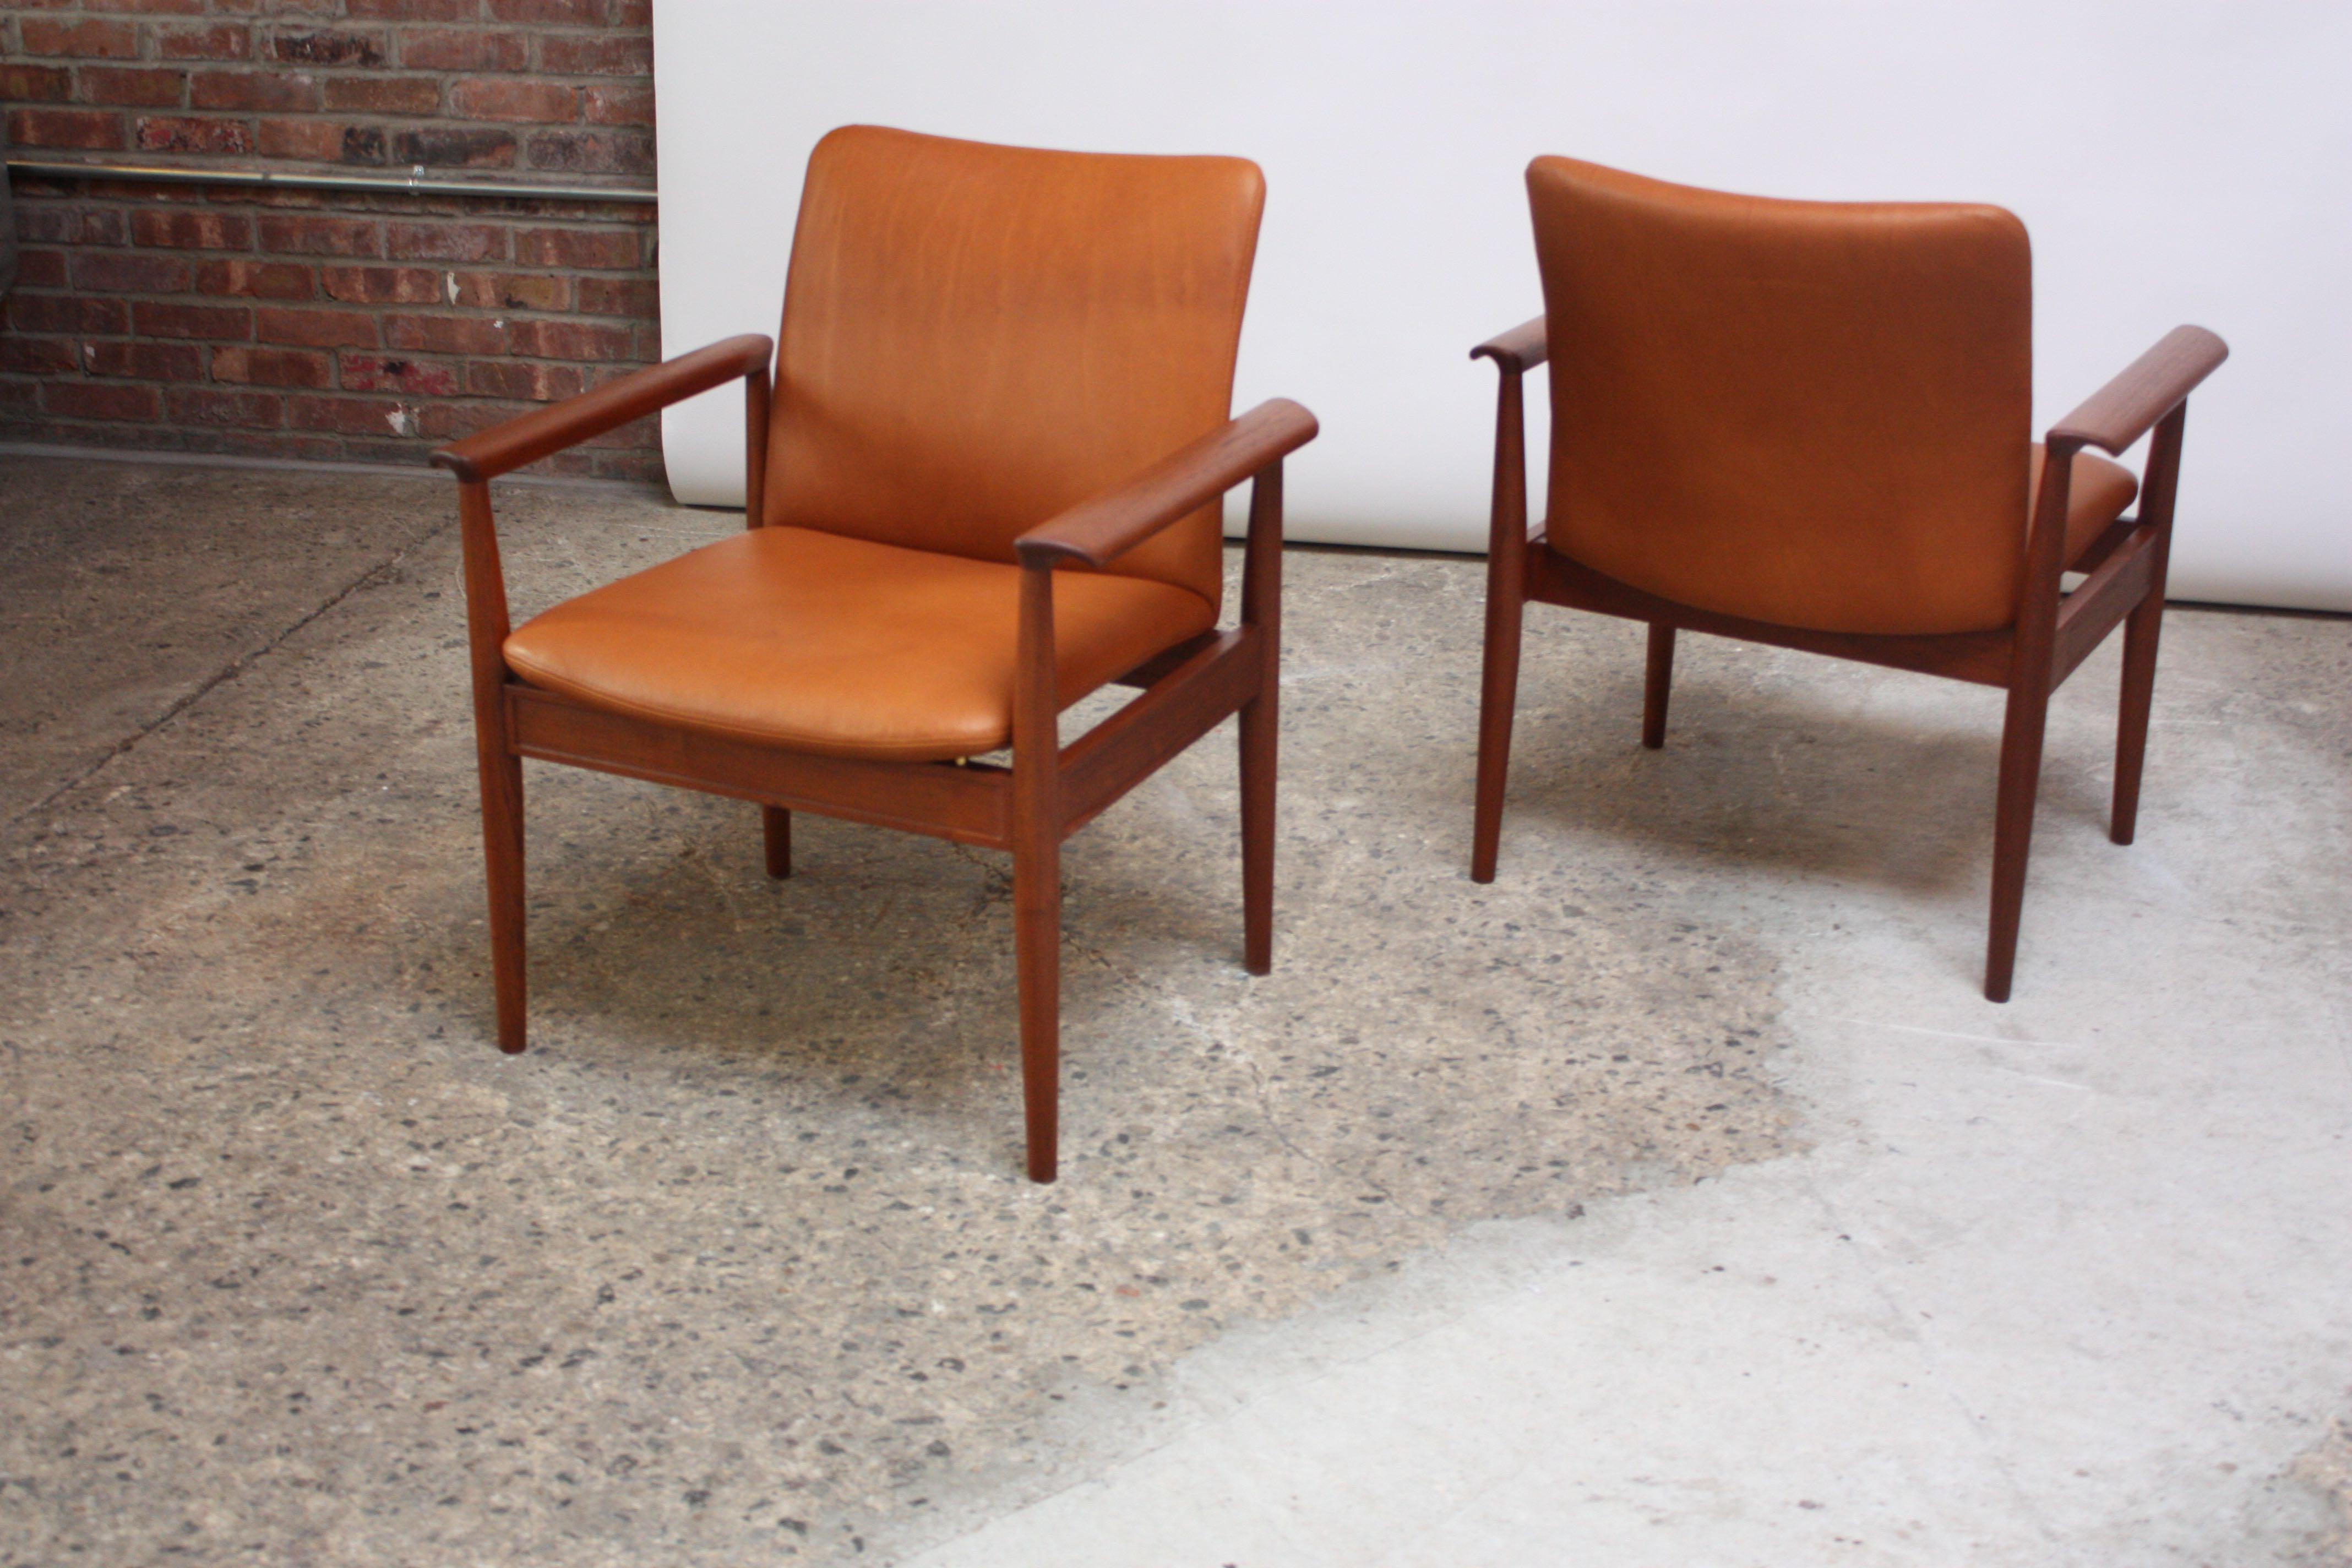 Mid-20th Century Pair of Finn Juhl Diplomat Armchairs for France & Son in Leather and Teak